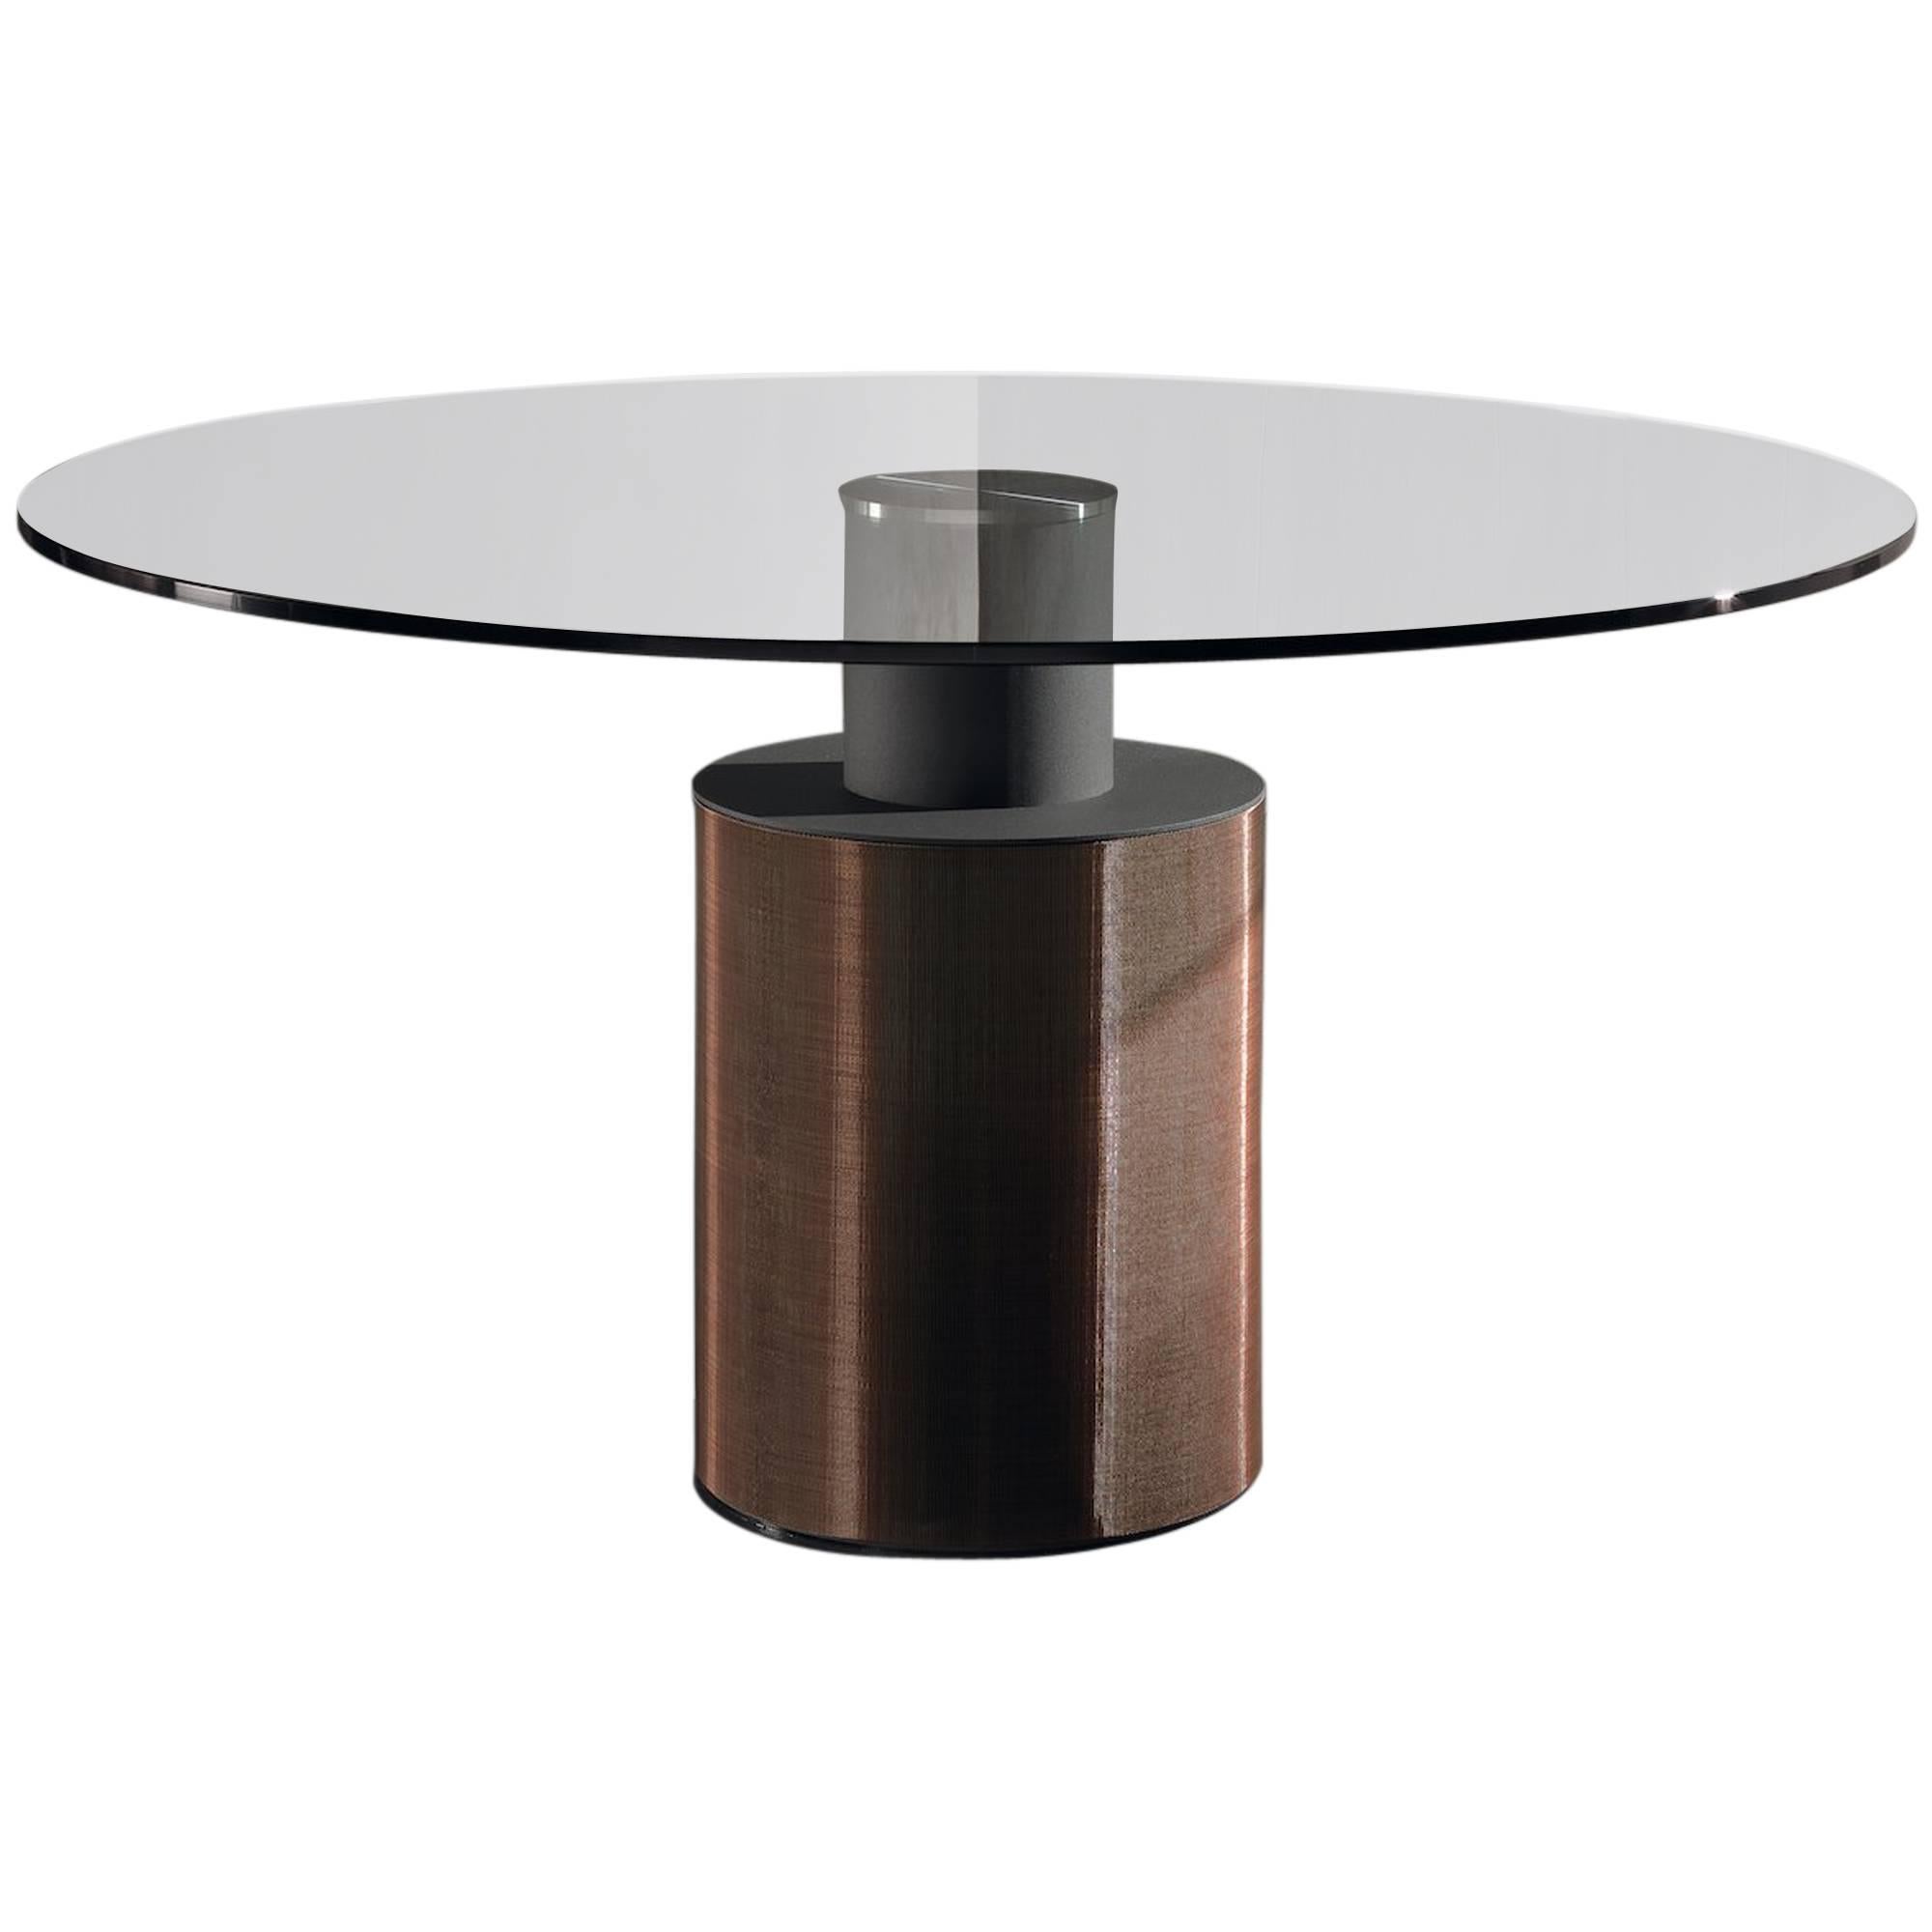 Creso Round Dining Table with Glass Top and Copper Base by Acerbis Design For Sale